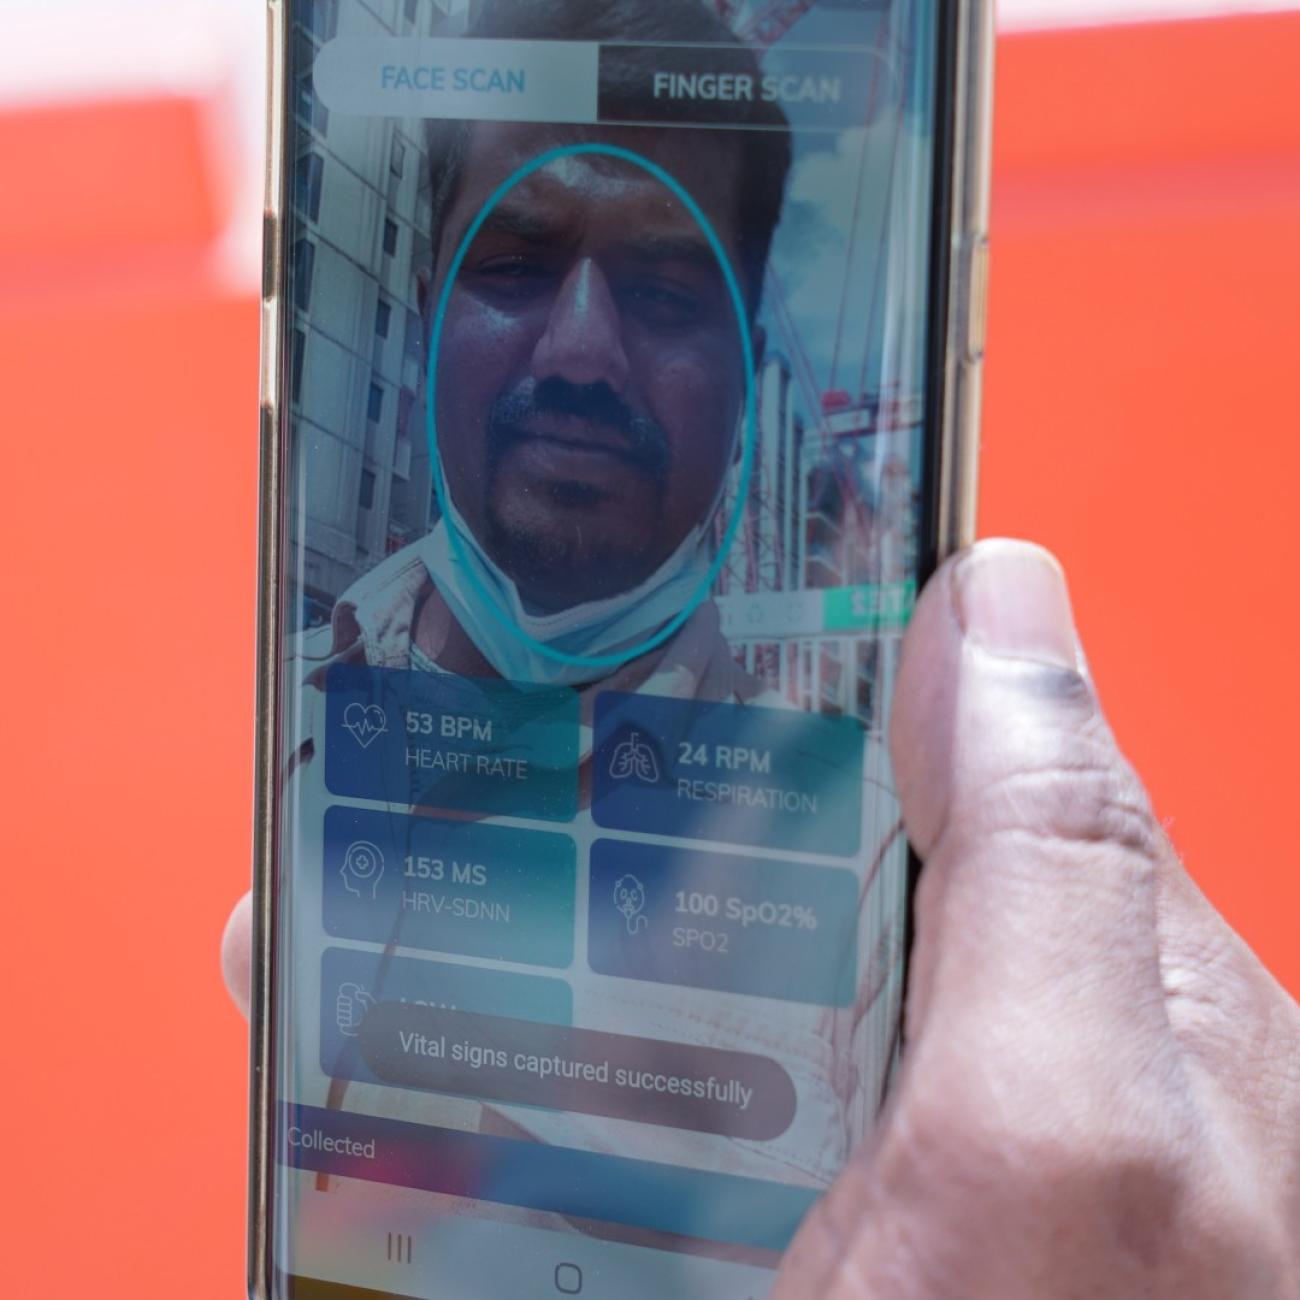 Gunasekar Udayakumar uses the Nervotec app to scan his face and check his vital signs as part of a daily checkup for employees, at a construction site, in central Singapore, on February 19 2021.